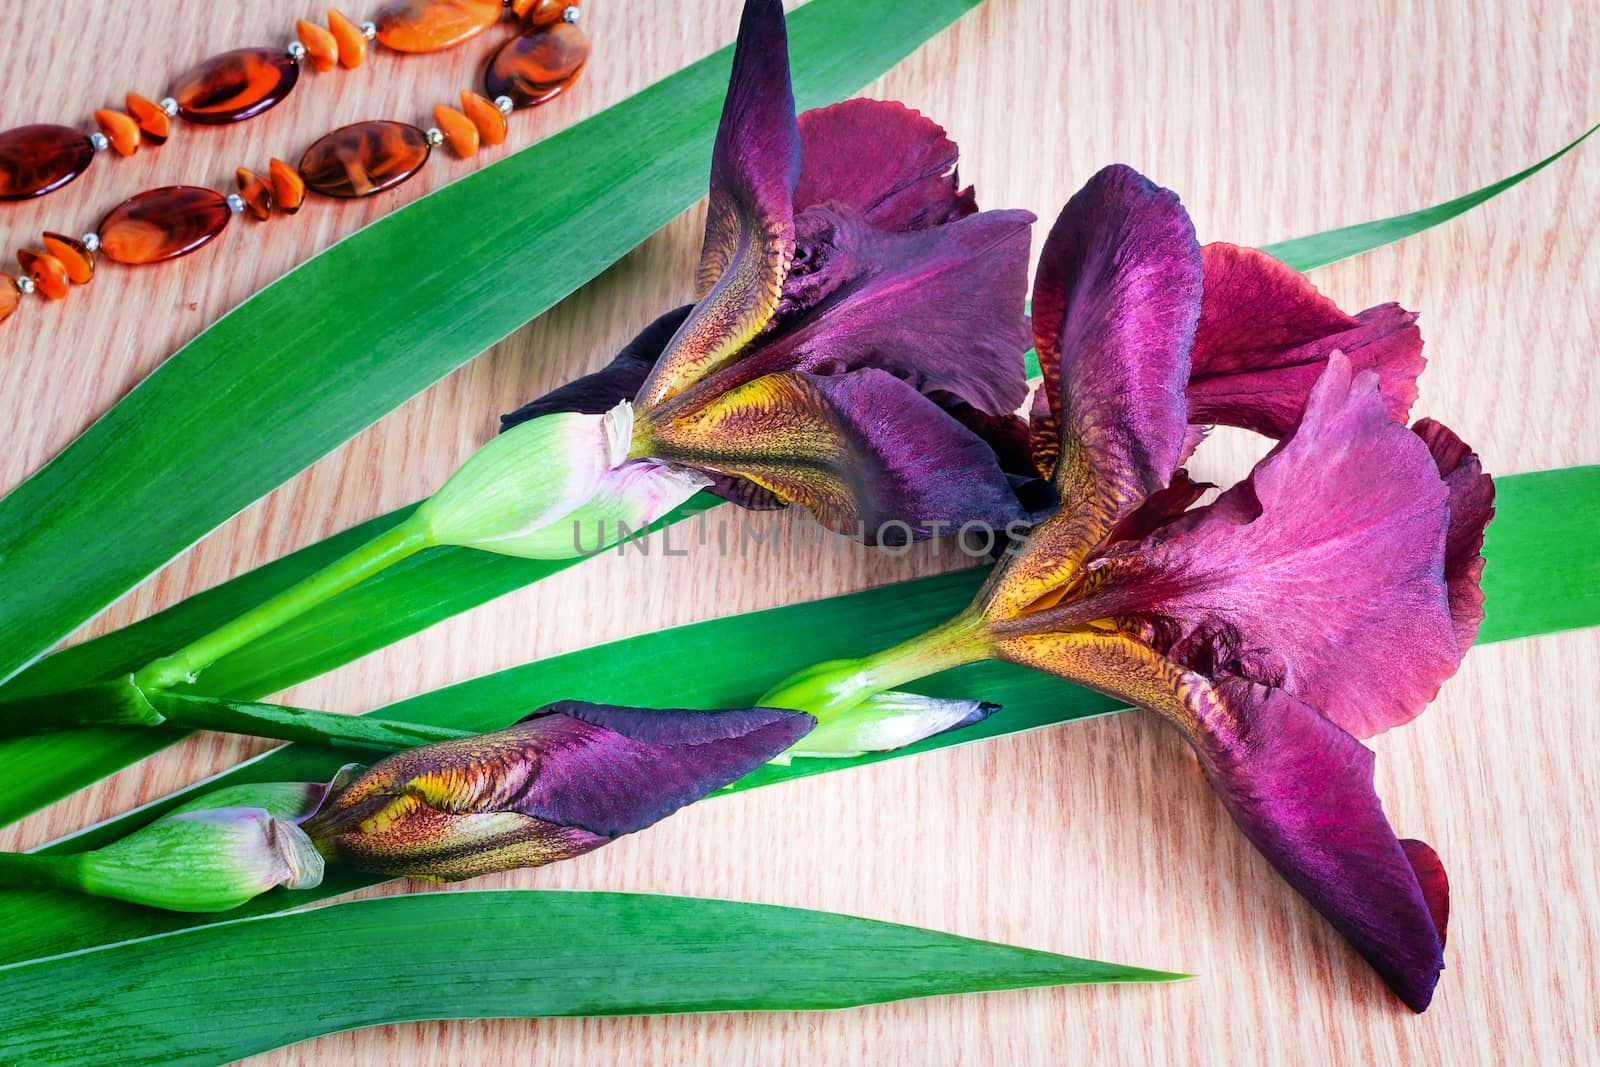 
On a surface of a table big purple irises lie, nearby there is a necklace.